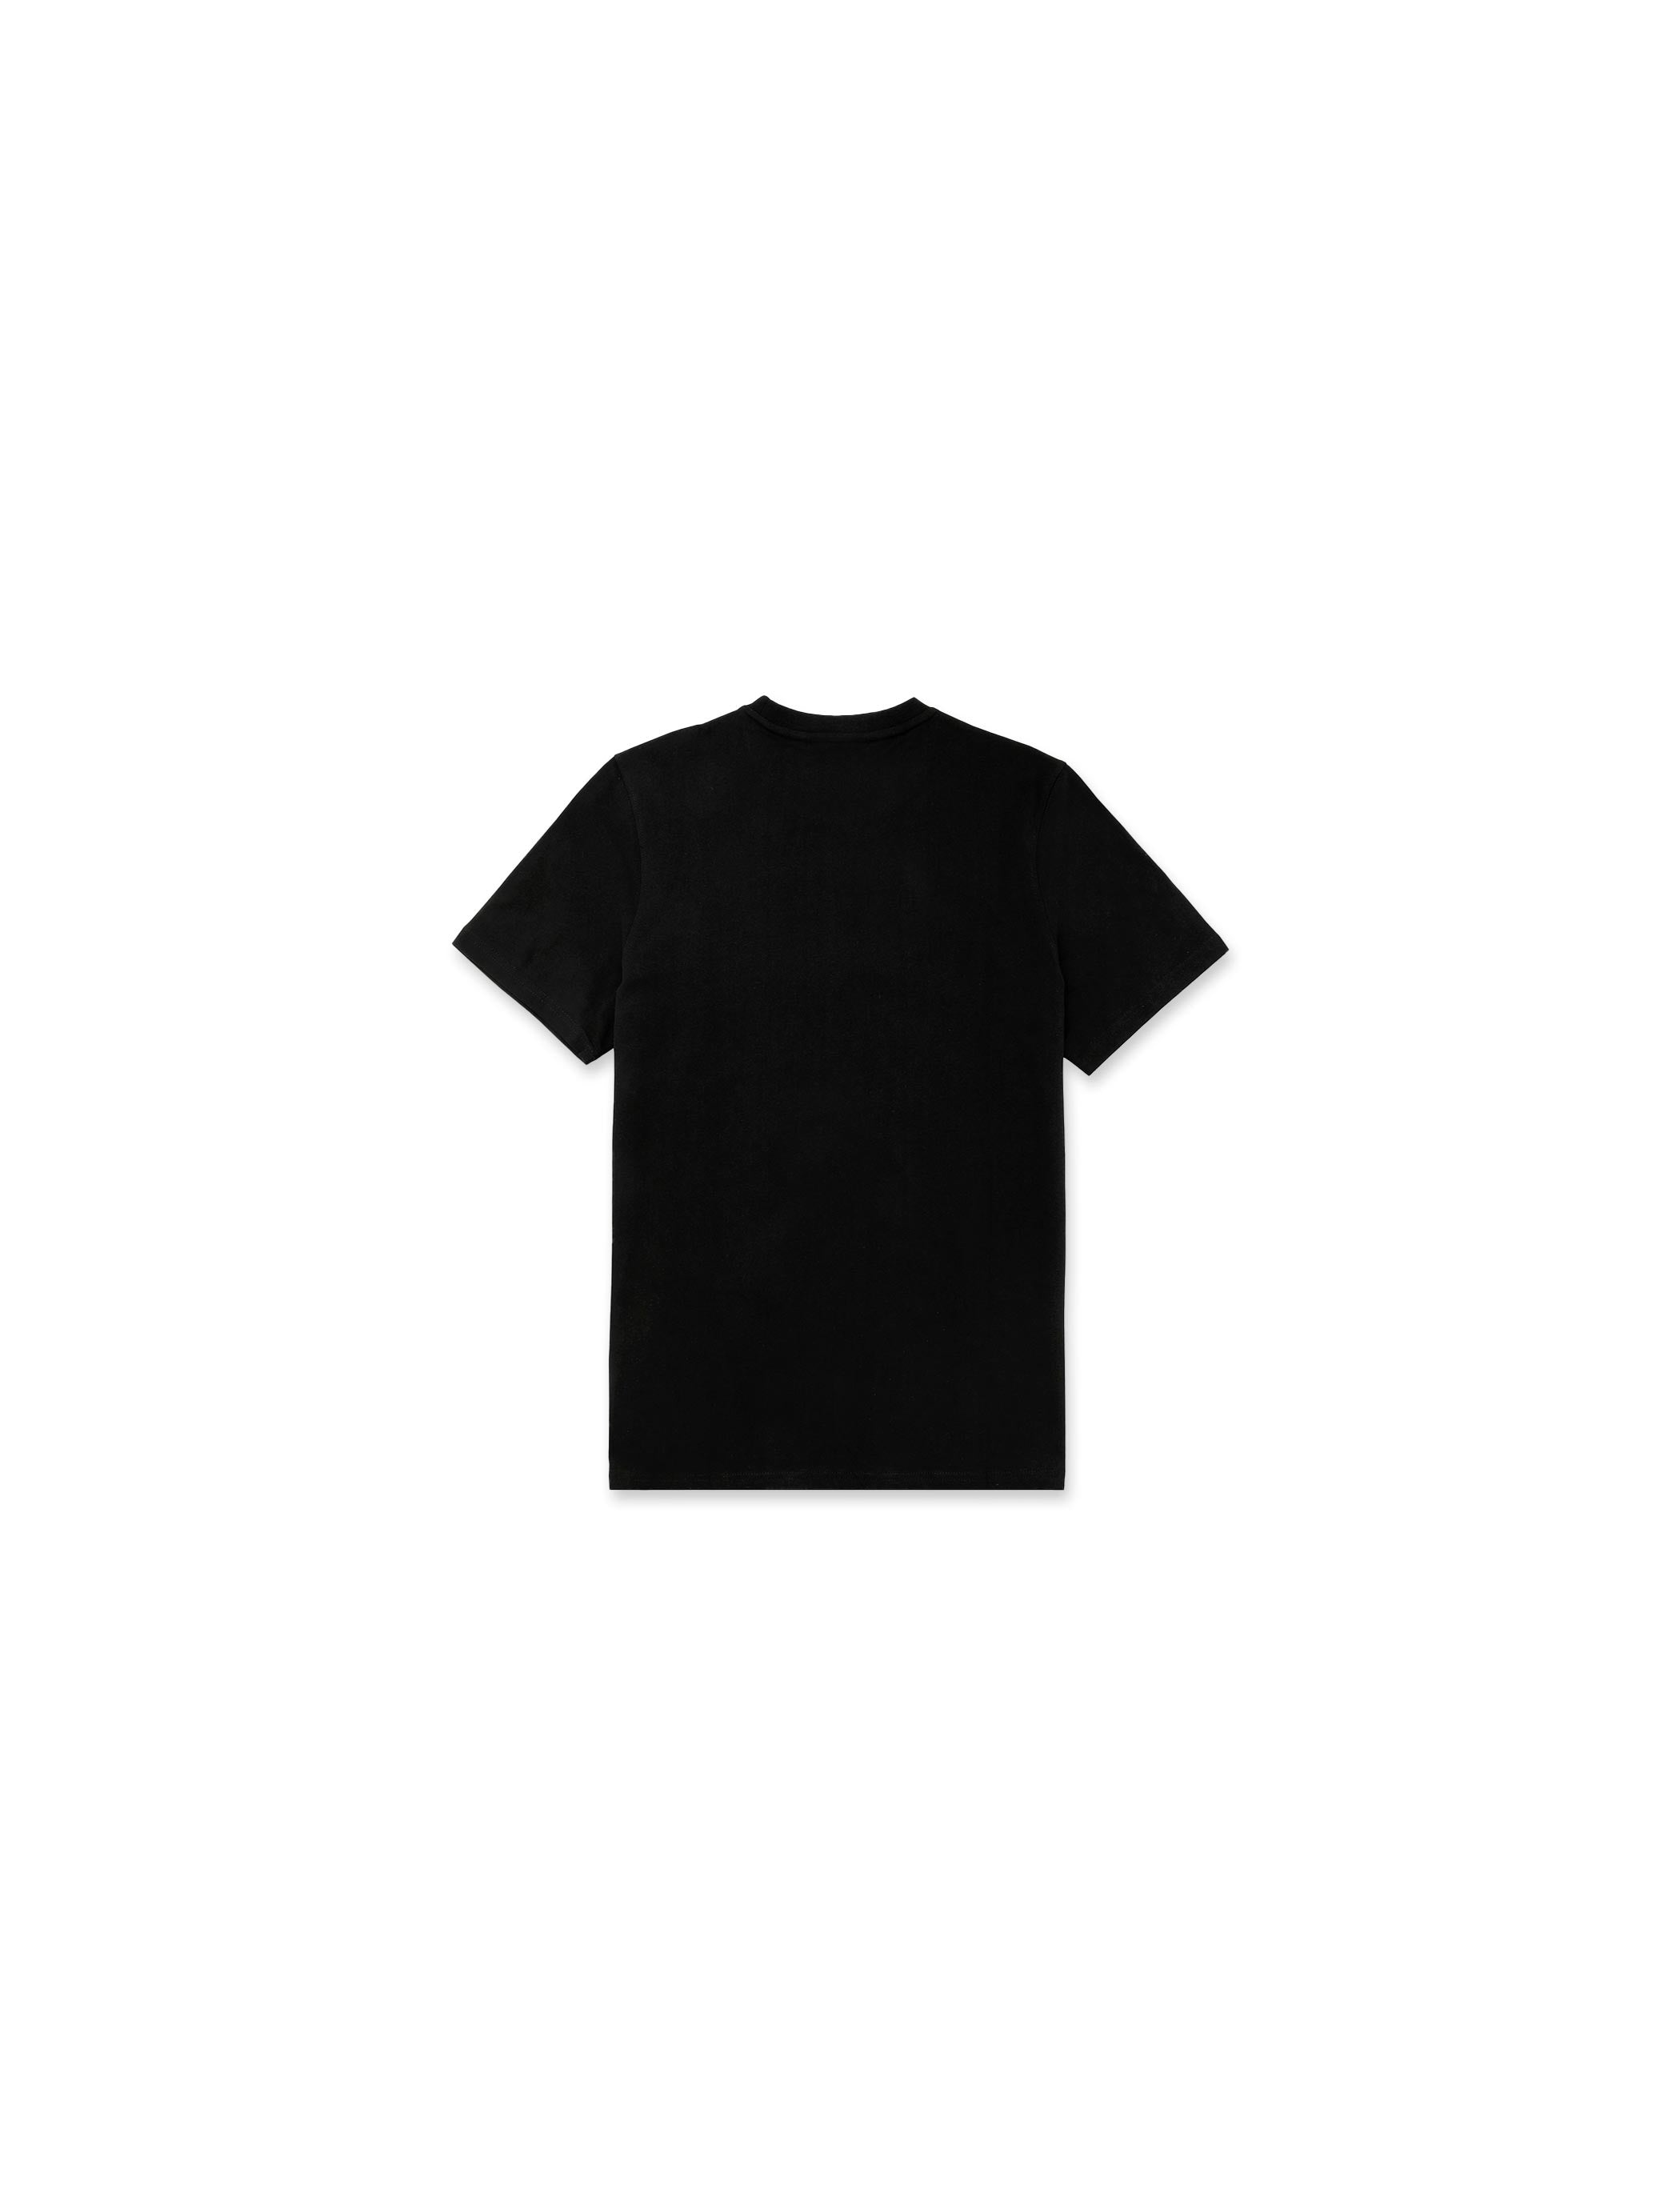 ISAAK SS TEE - BLACK (W) - Embreys Projects